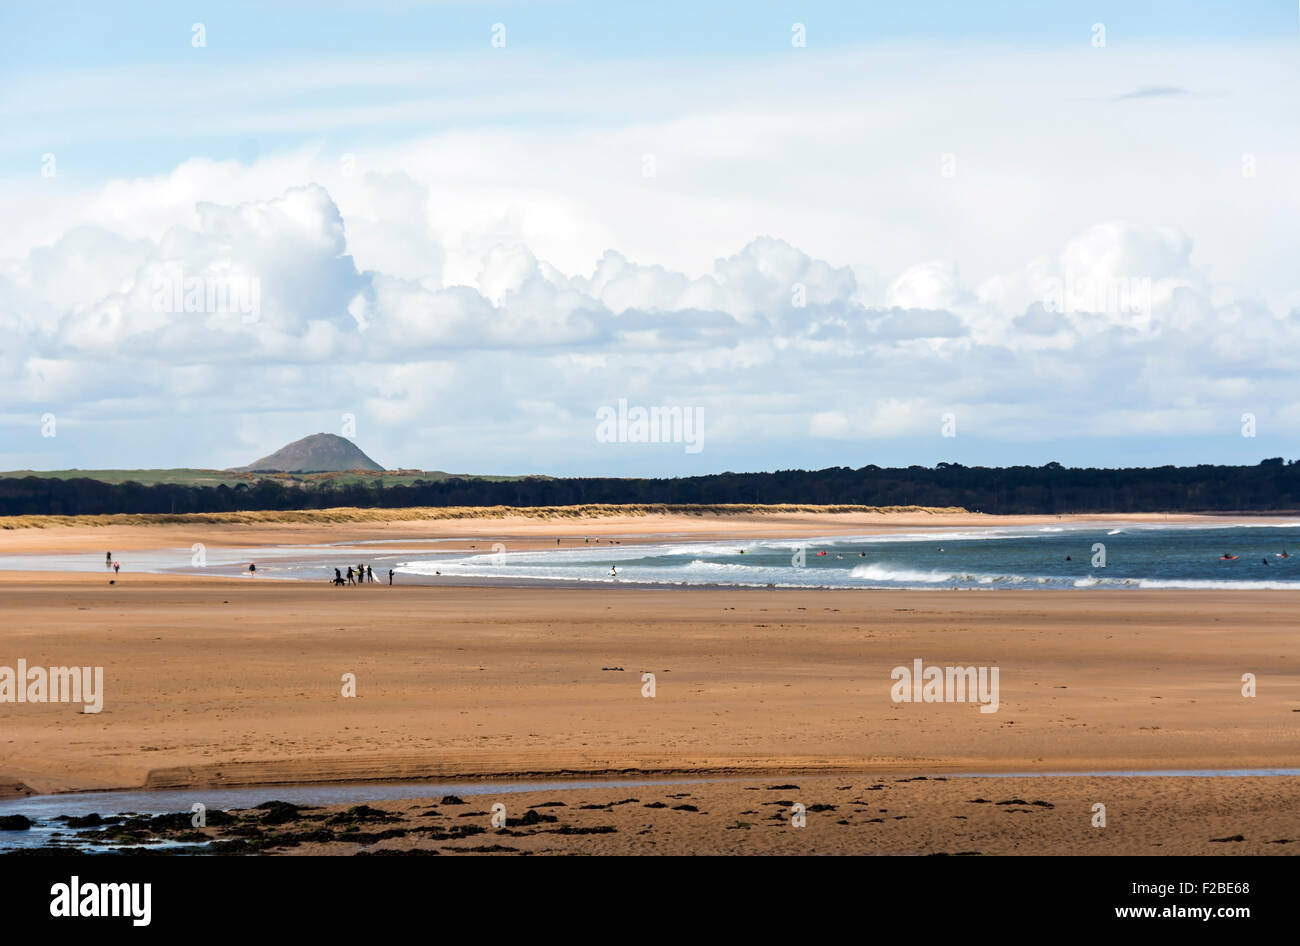 Low tide at Belhaven beach, West Barns, on the John Muir Way, near Dunbar, East Lothian, Scotland. North Berwick Law is in the distance. Stock Photo